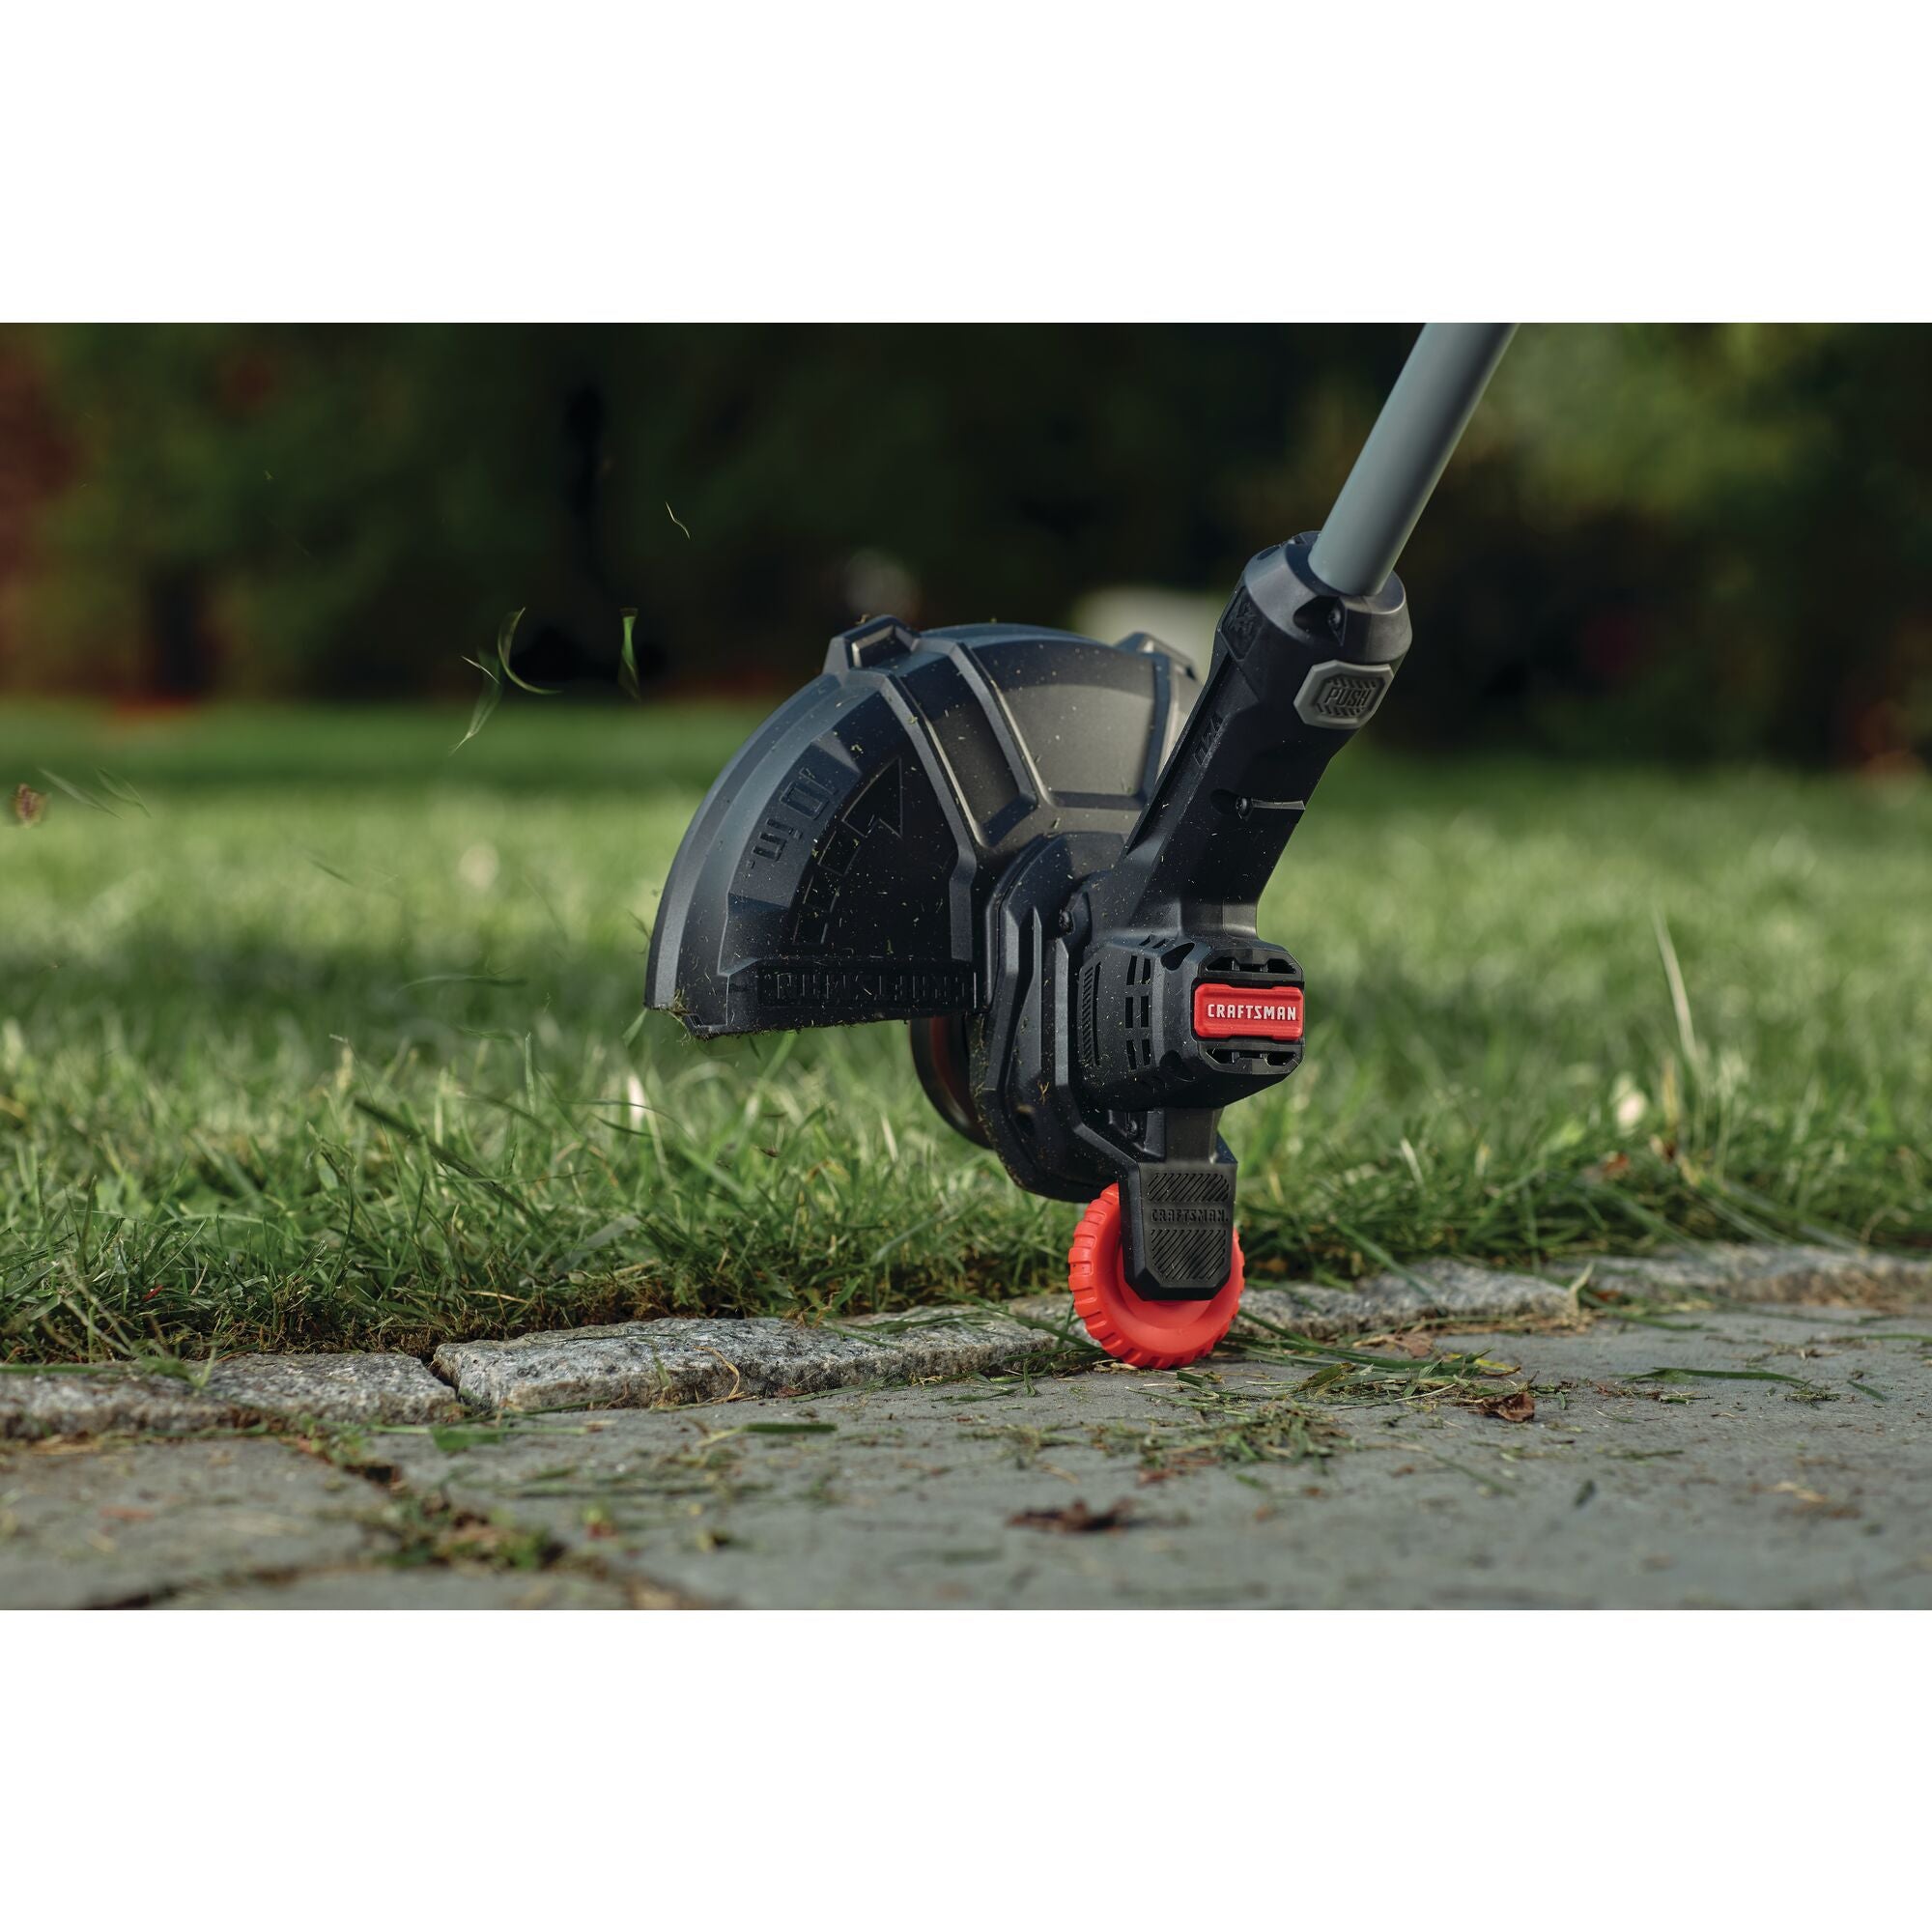 Integrated wheel edged guide feature of 20 volt cordless 10 inch weedwacker string trimmer and edger.